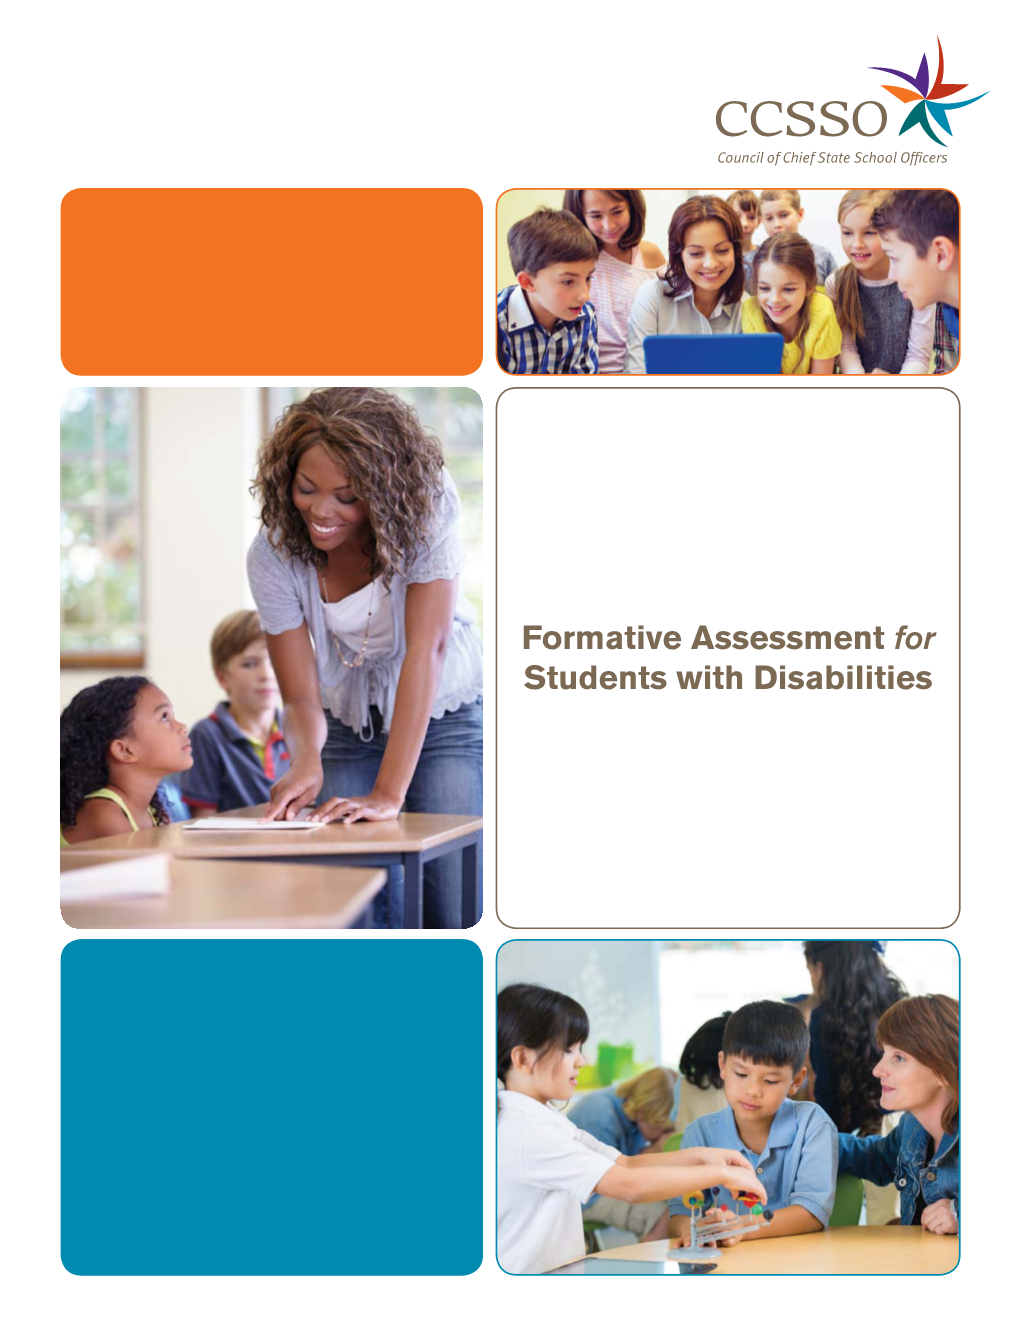 Formative Assessment for Students with Disabilities the COUNCIL of CHIEF STATE SCHOOL OFFICERS